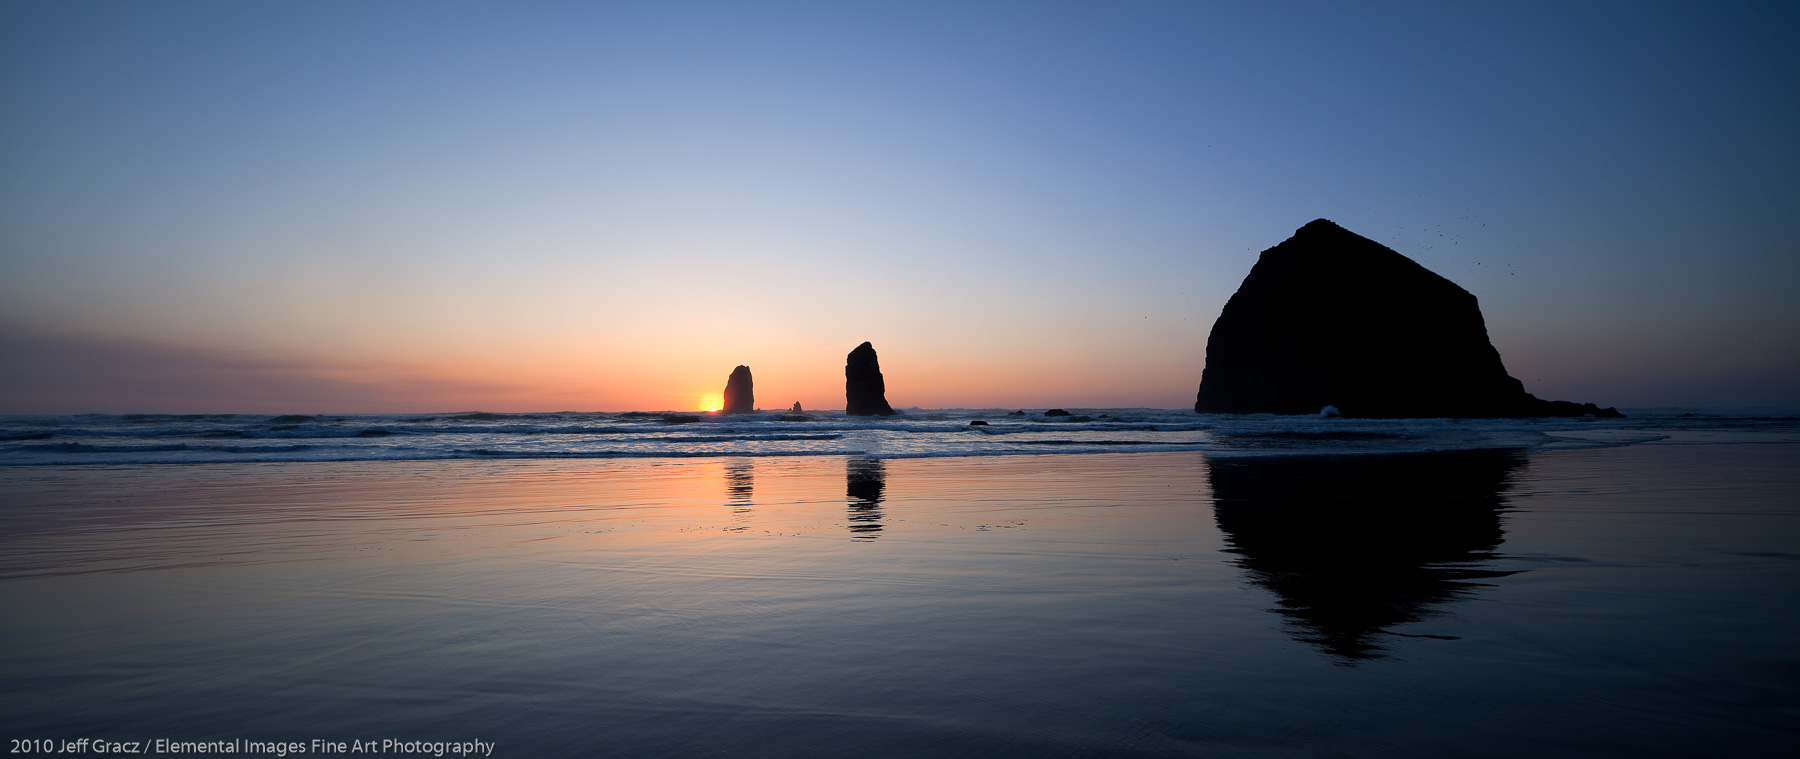 Cannon Beach seastacks at sunset | Cannon Beach | OR |  - © 2010 Jeff Gracz / Elemental Images Fine Art Photography - All Rights Reserved Worldwide